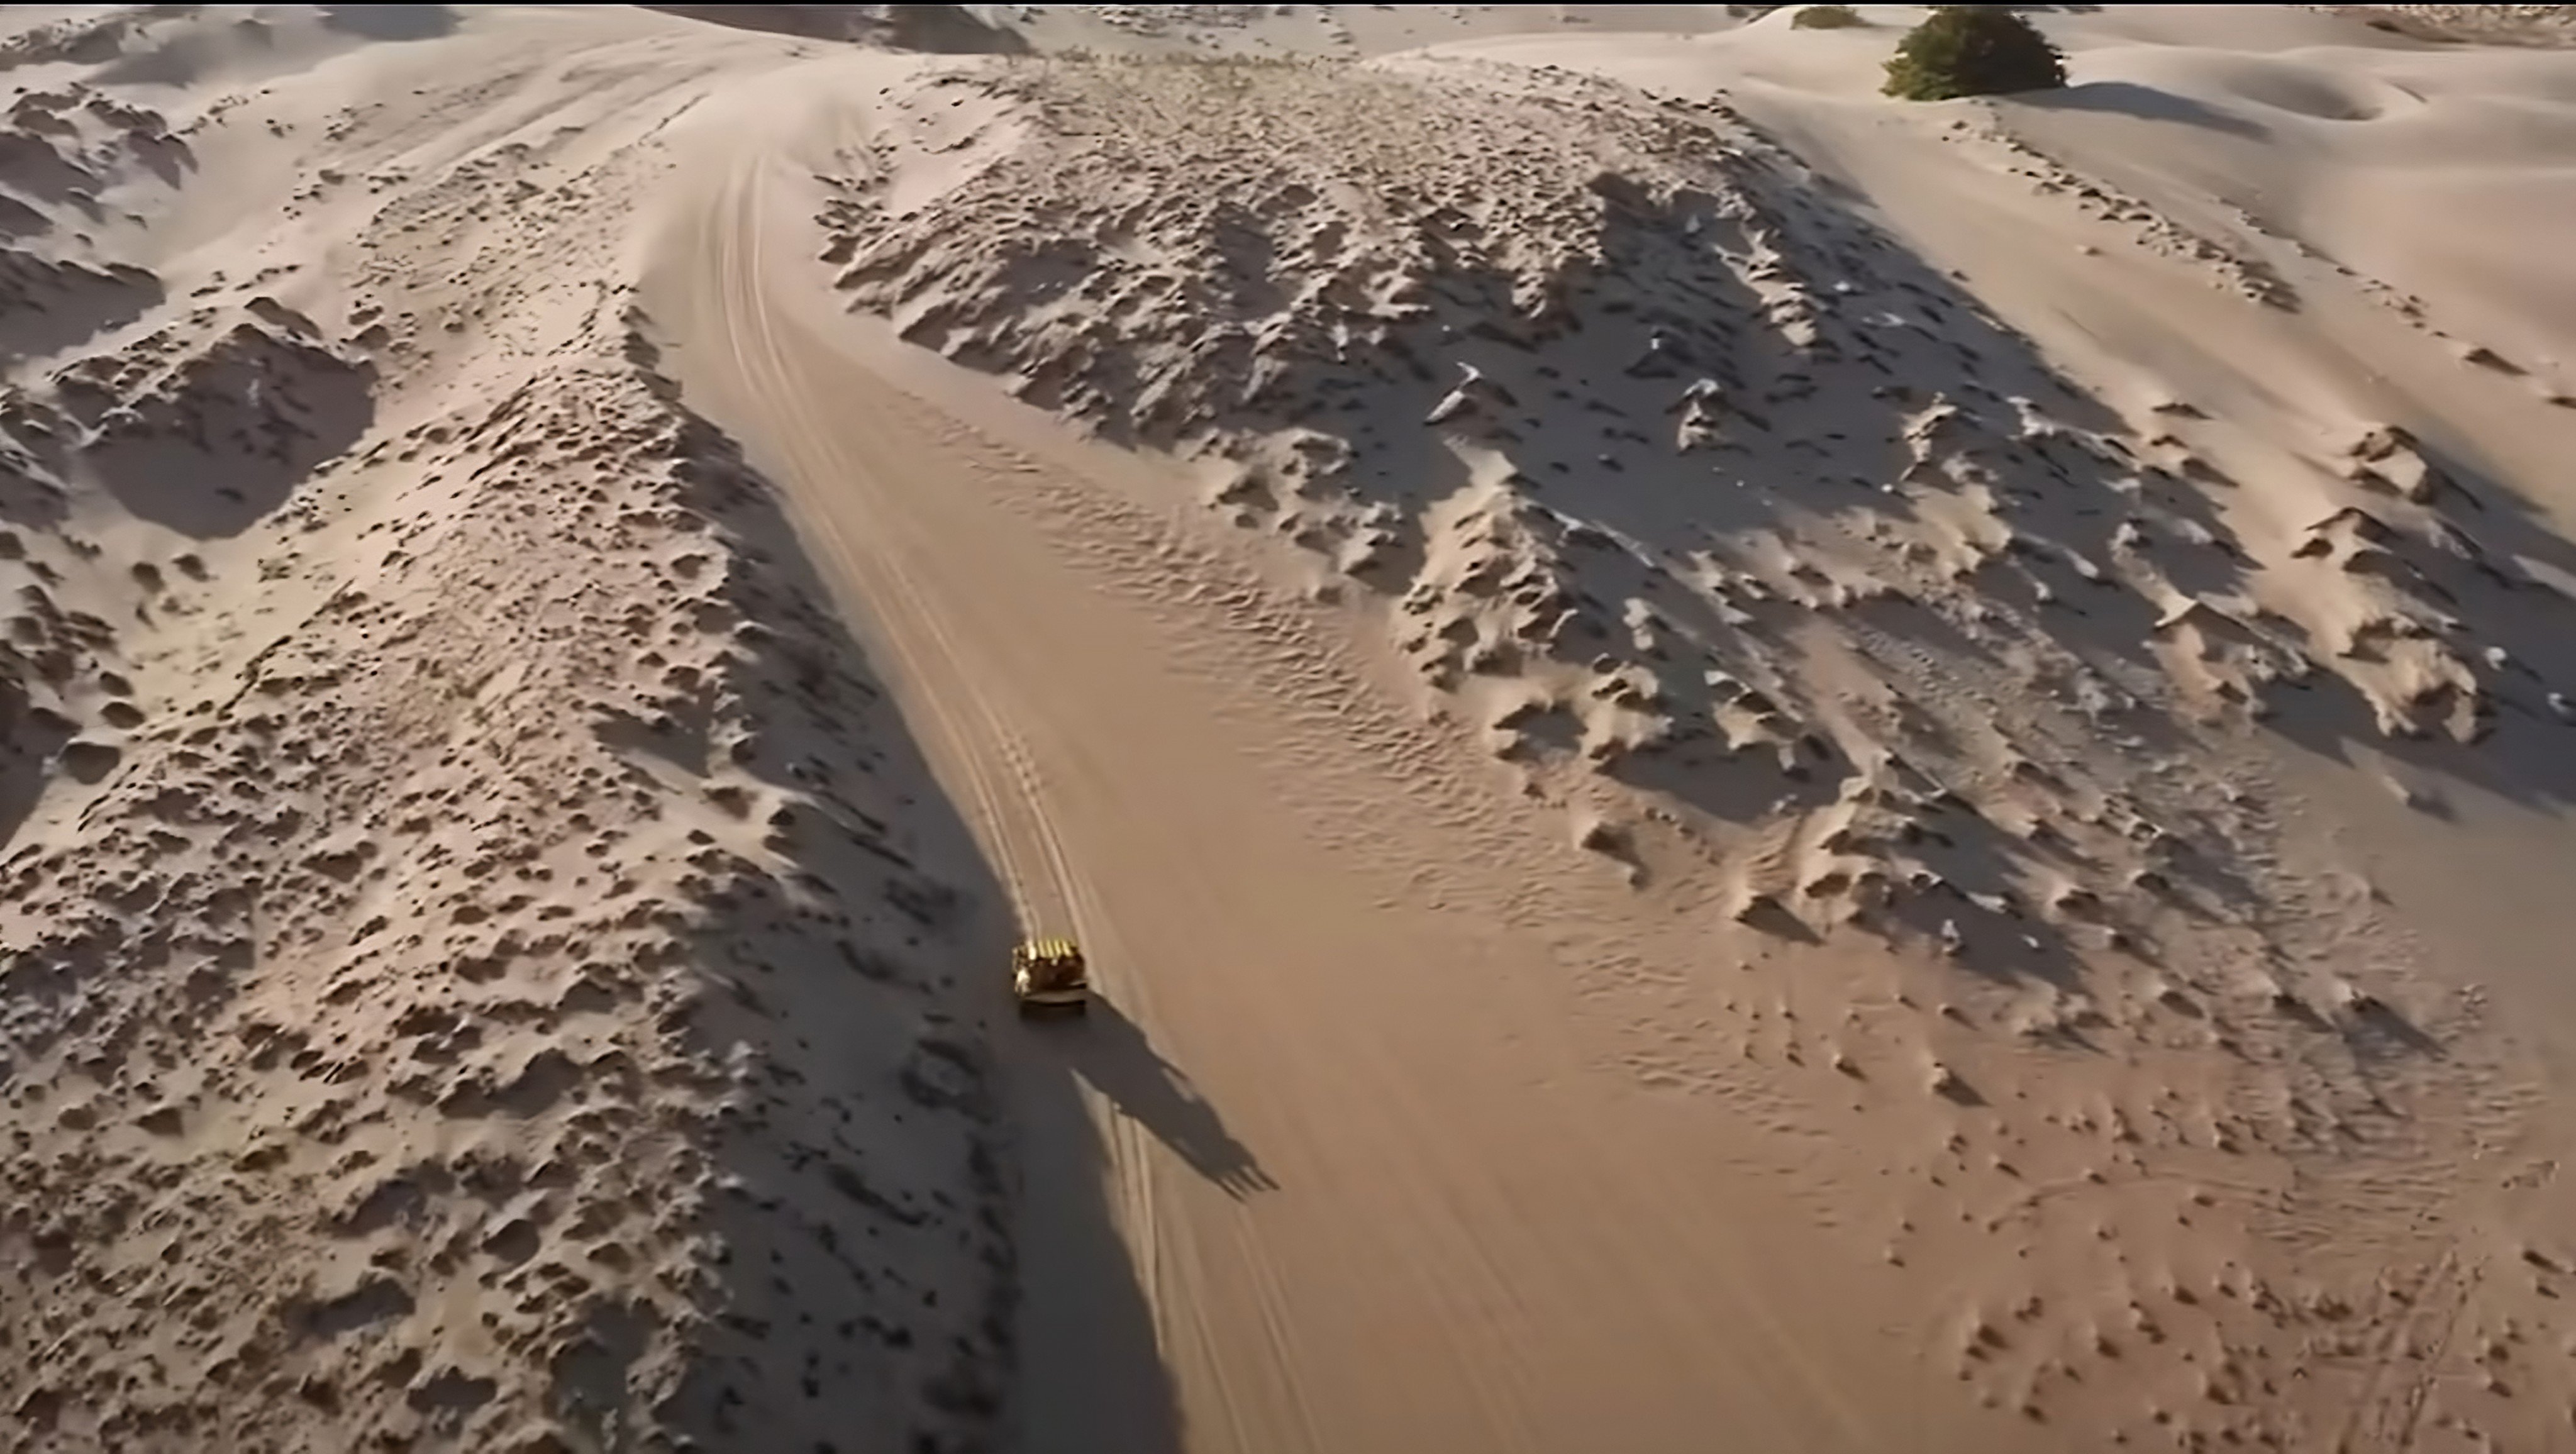 A still from the “Love The Philippines” tourism advert that fact checkers say shows sand dunes in Cumbuco, northeastern Brazil. Photo: YouTube/@YourOfficialWebbyChannel